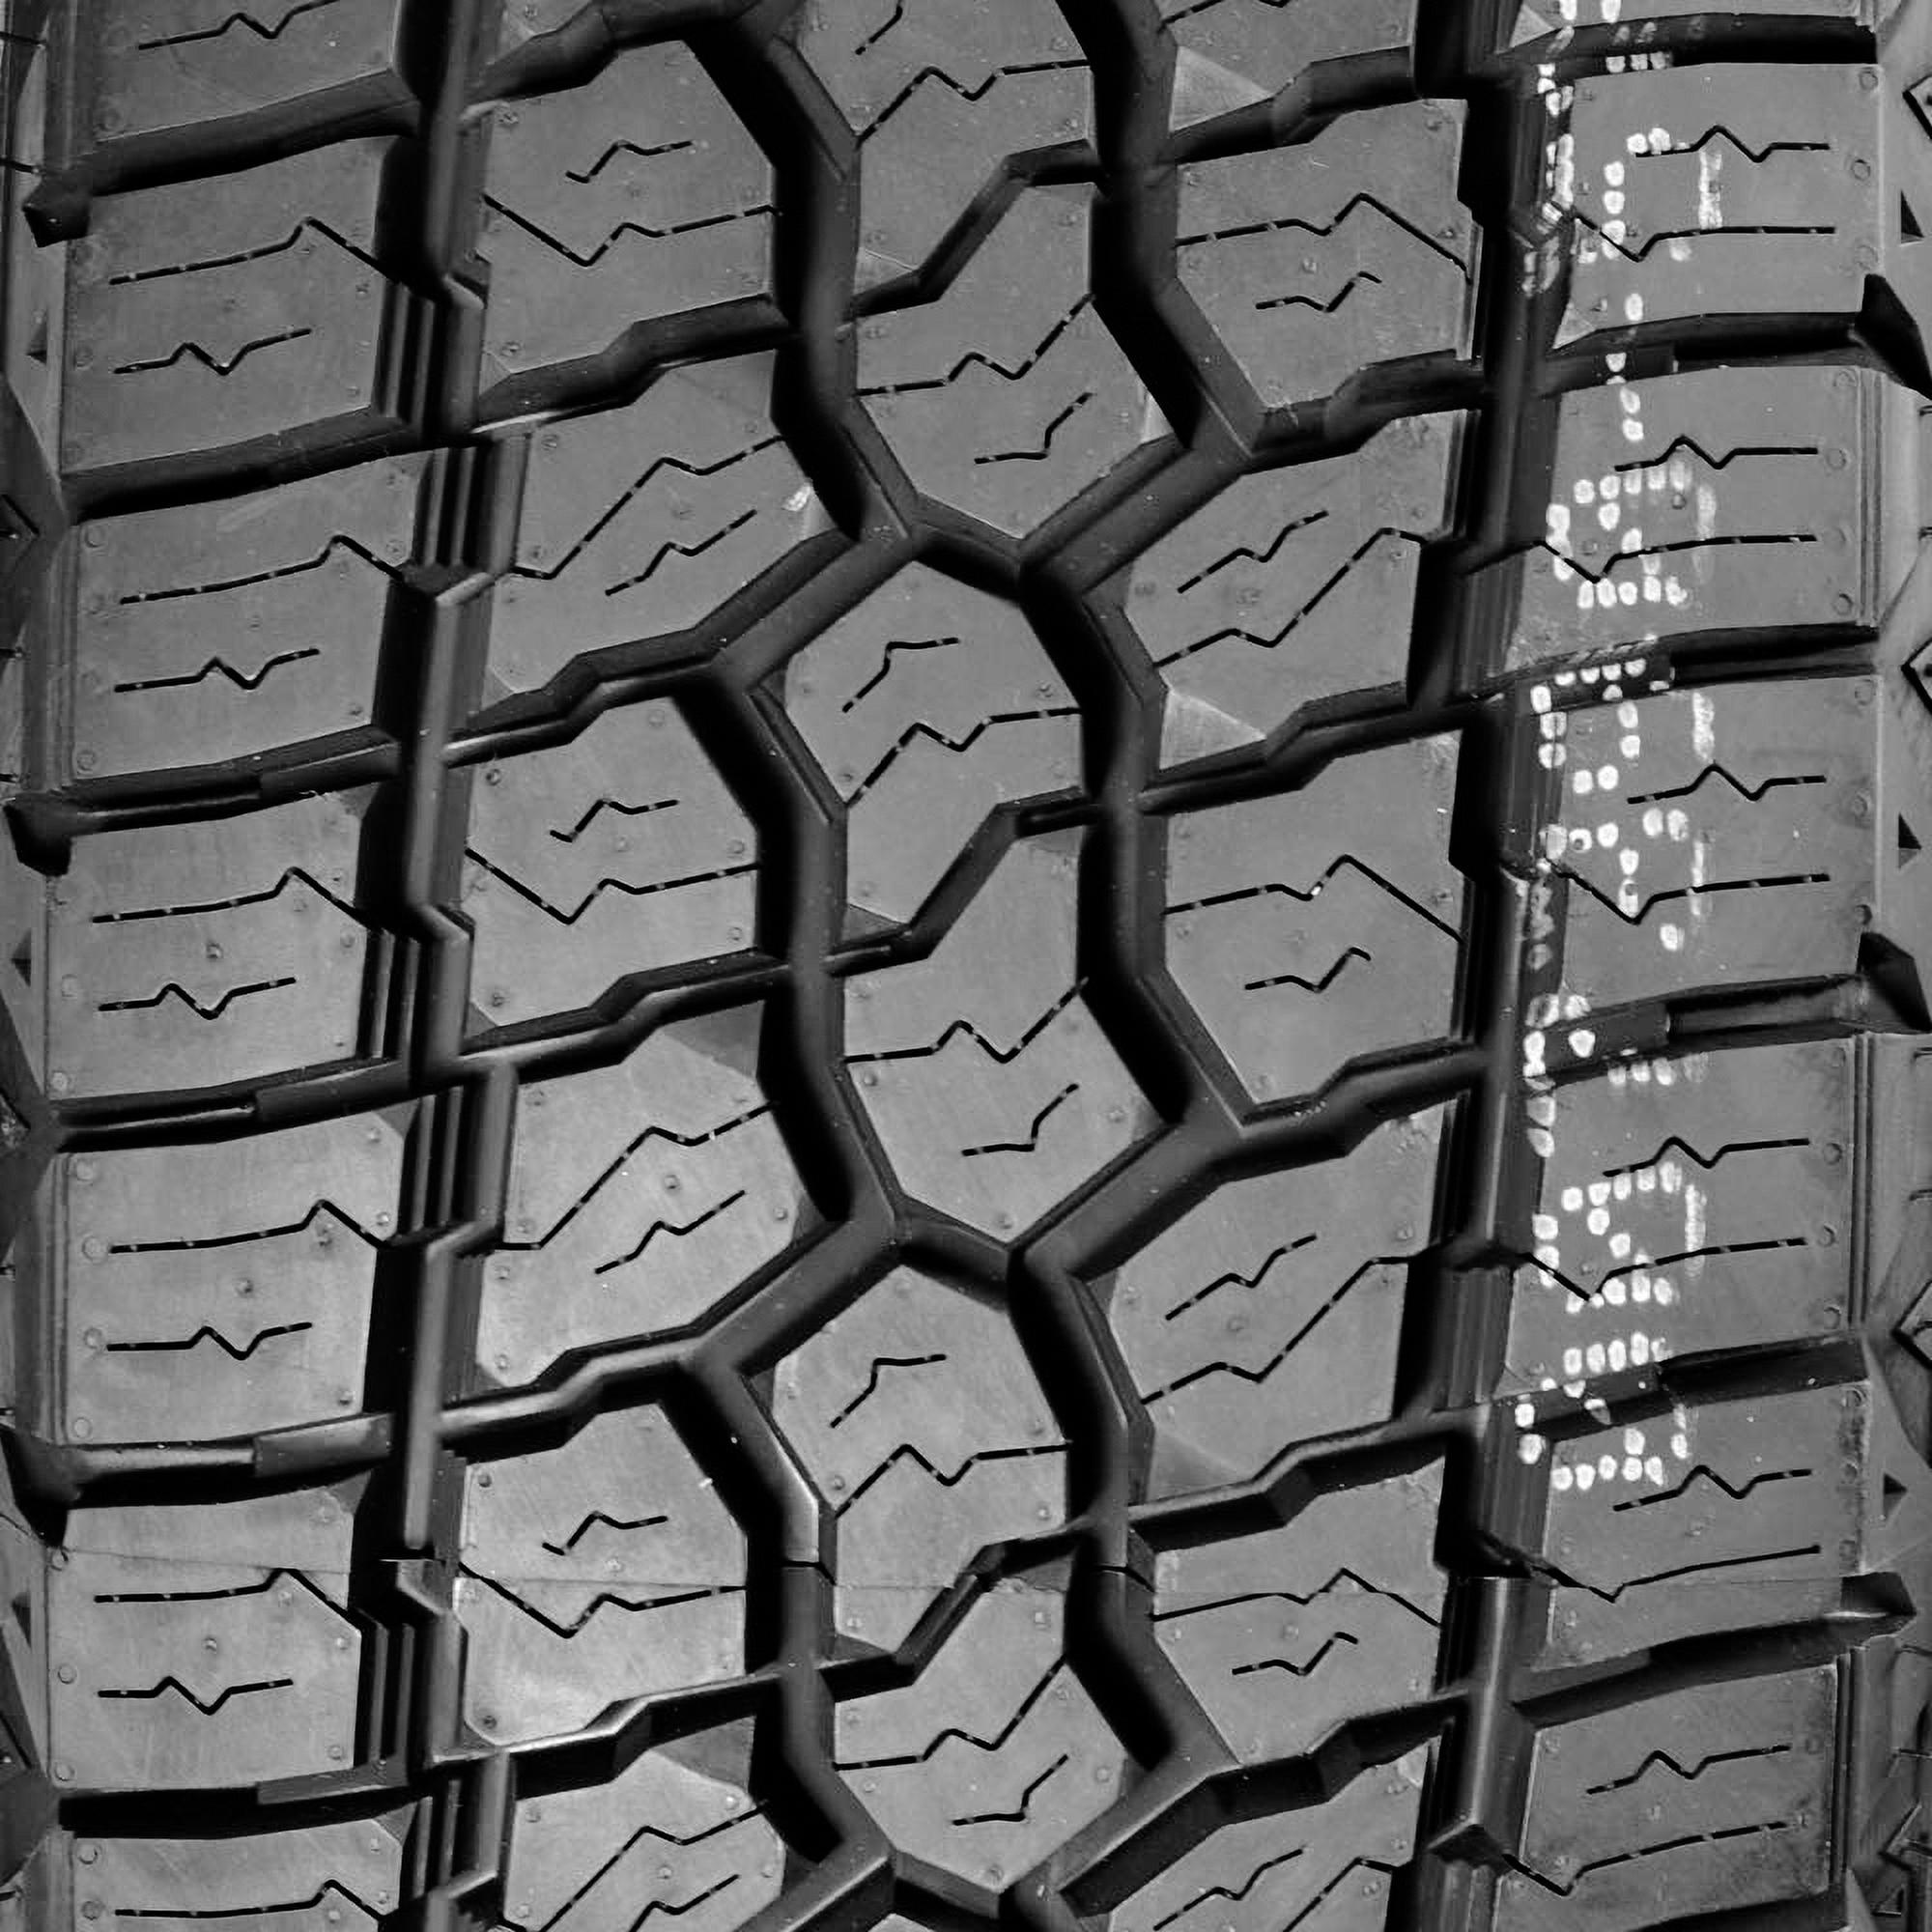 Pair of 2 (TWO) Milestar Patagonia A/T R LT 245/75R17 Load E 10 Ply Rugged Terrain Tires Fits: 2011-13 Chevrolet Silverado 2500 HD WT - image 3 of 3